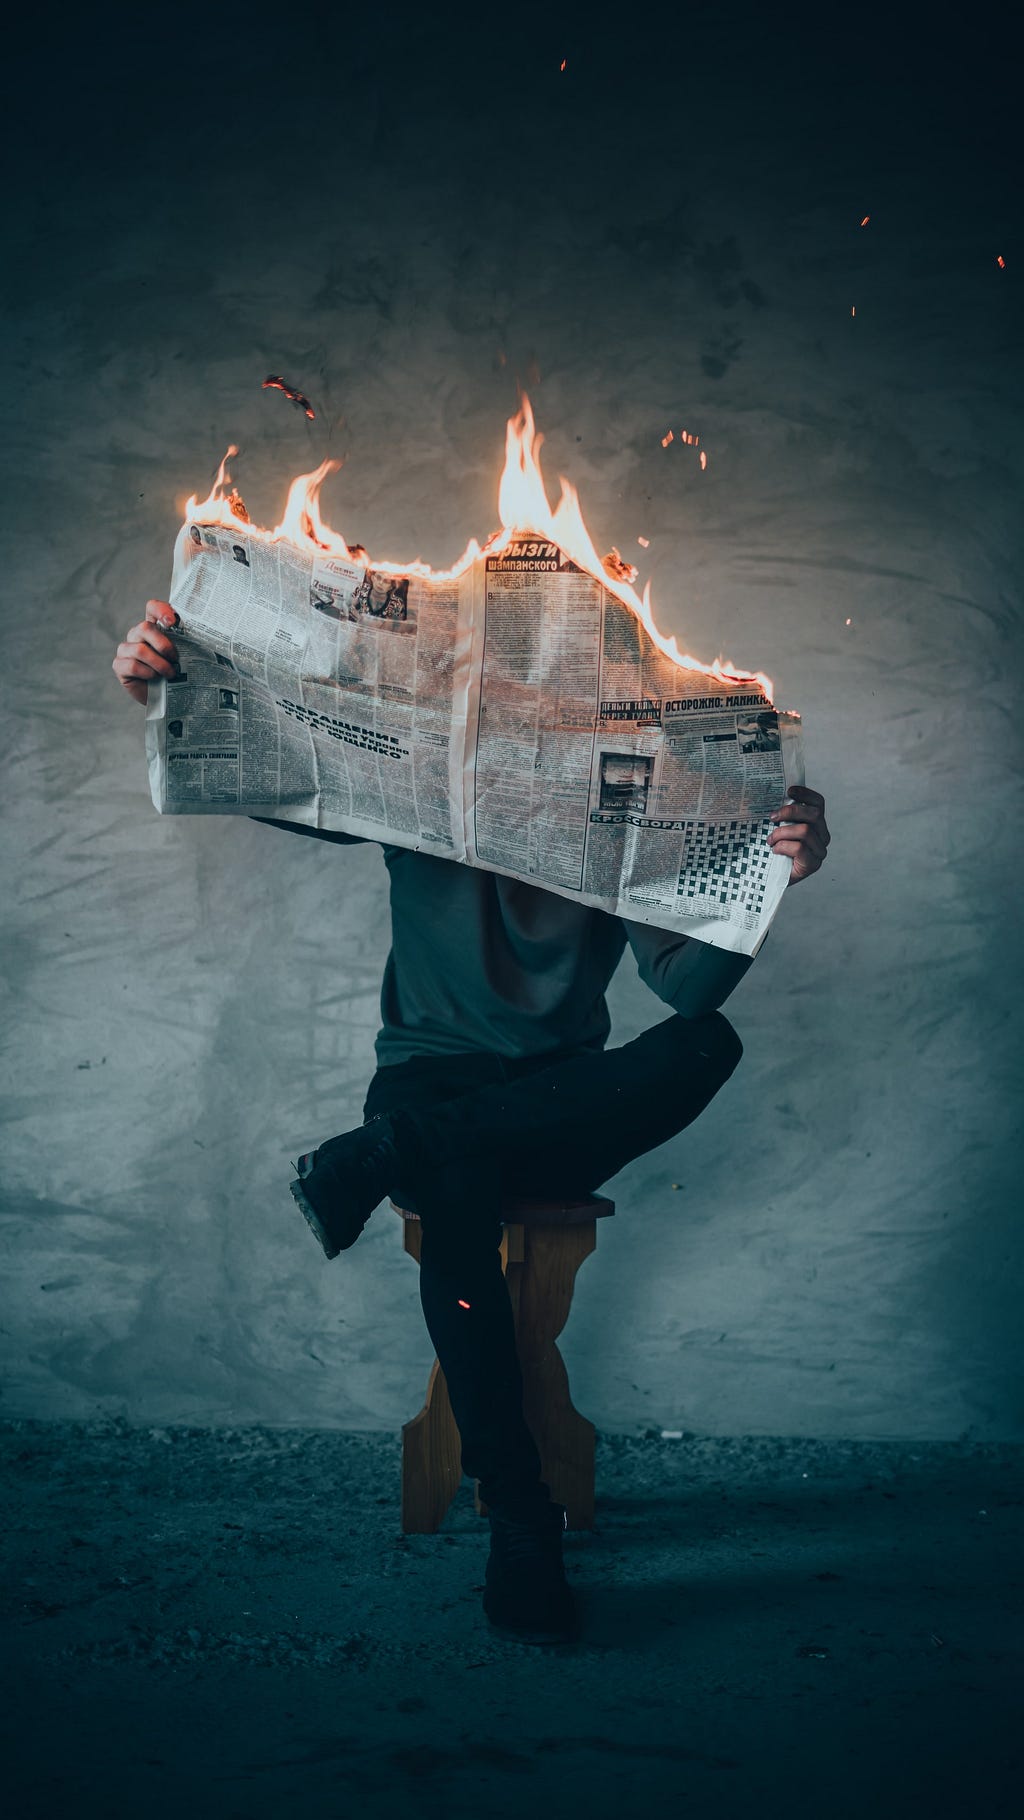 Man sitting, facing you, newspaper raised to read, reading it burns, top down. Photo by Elijah O’Donnell on Unsplash